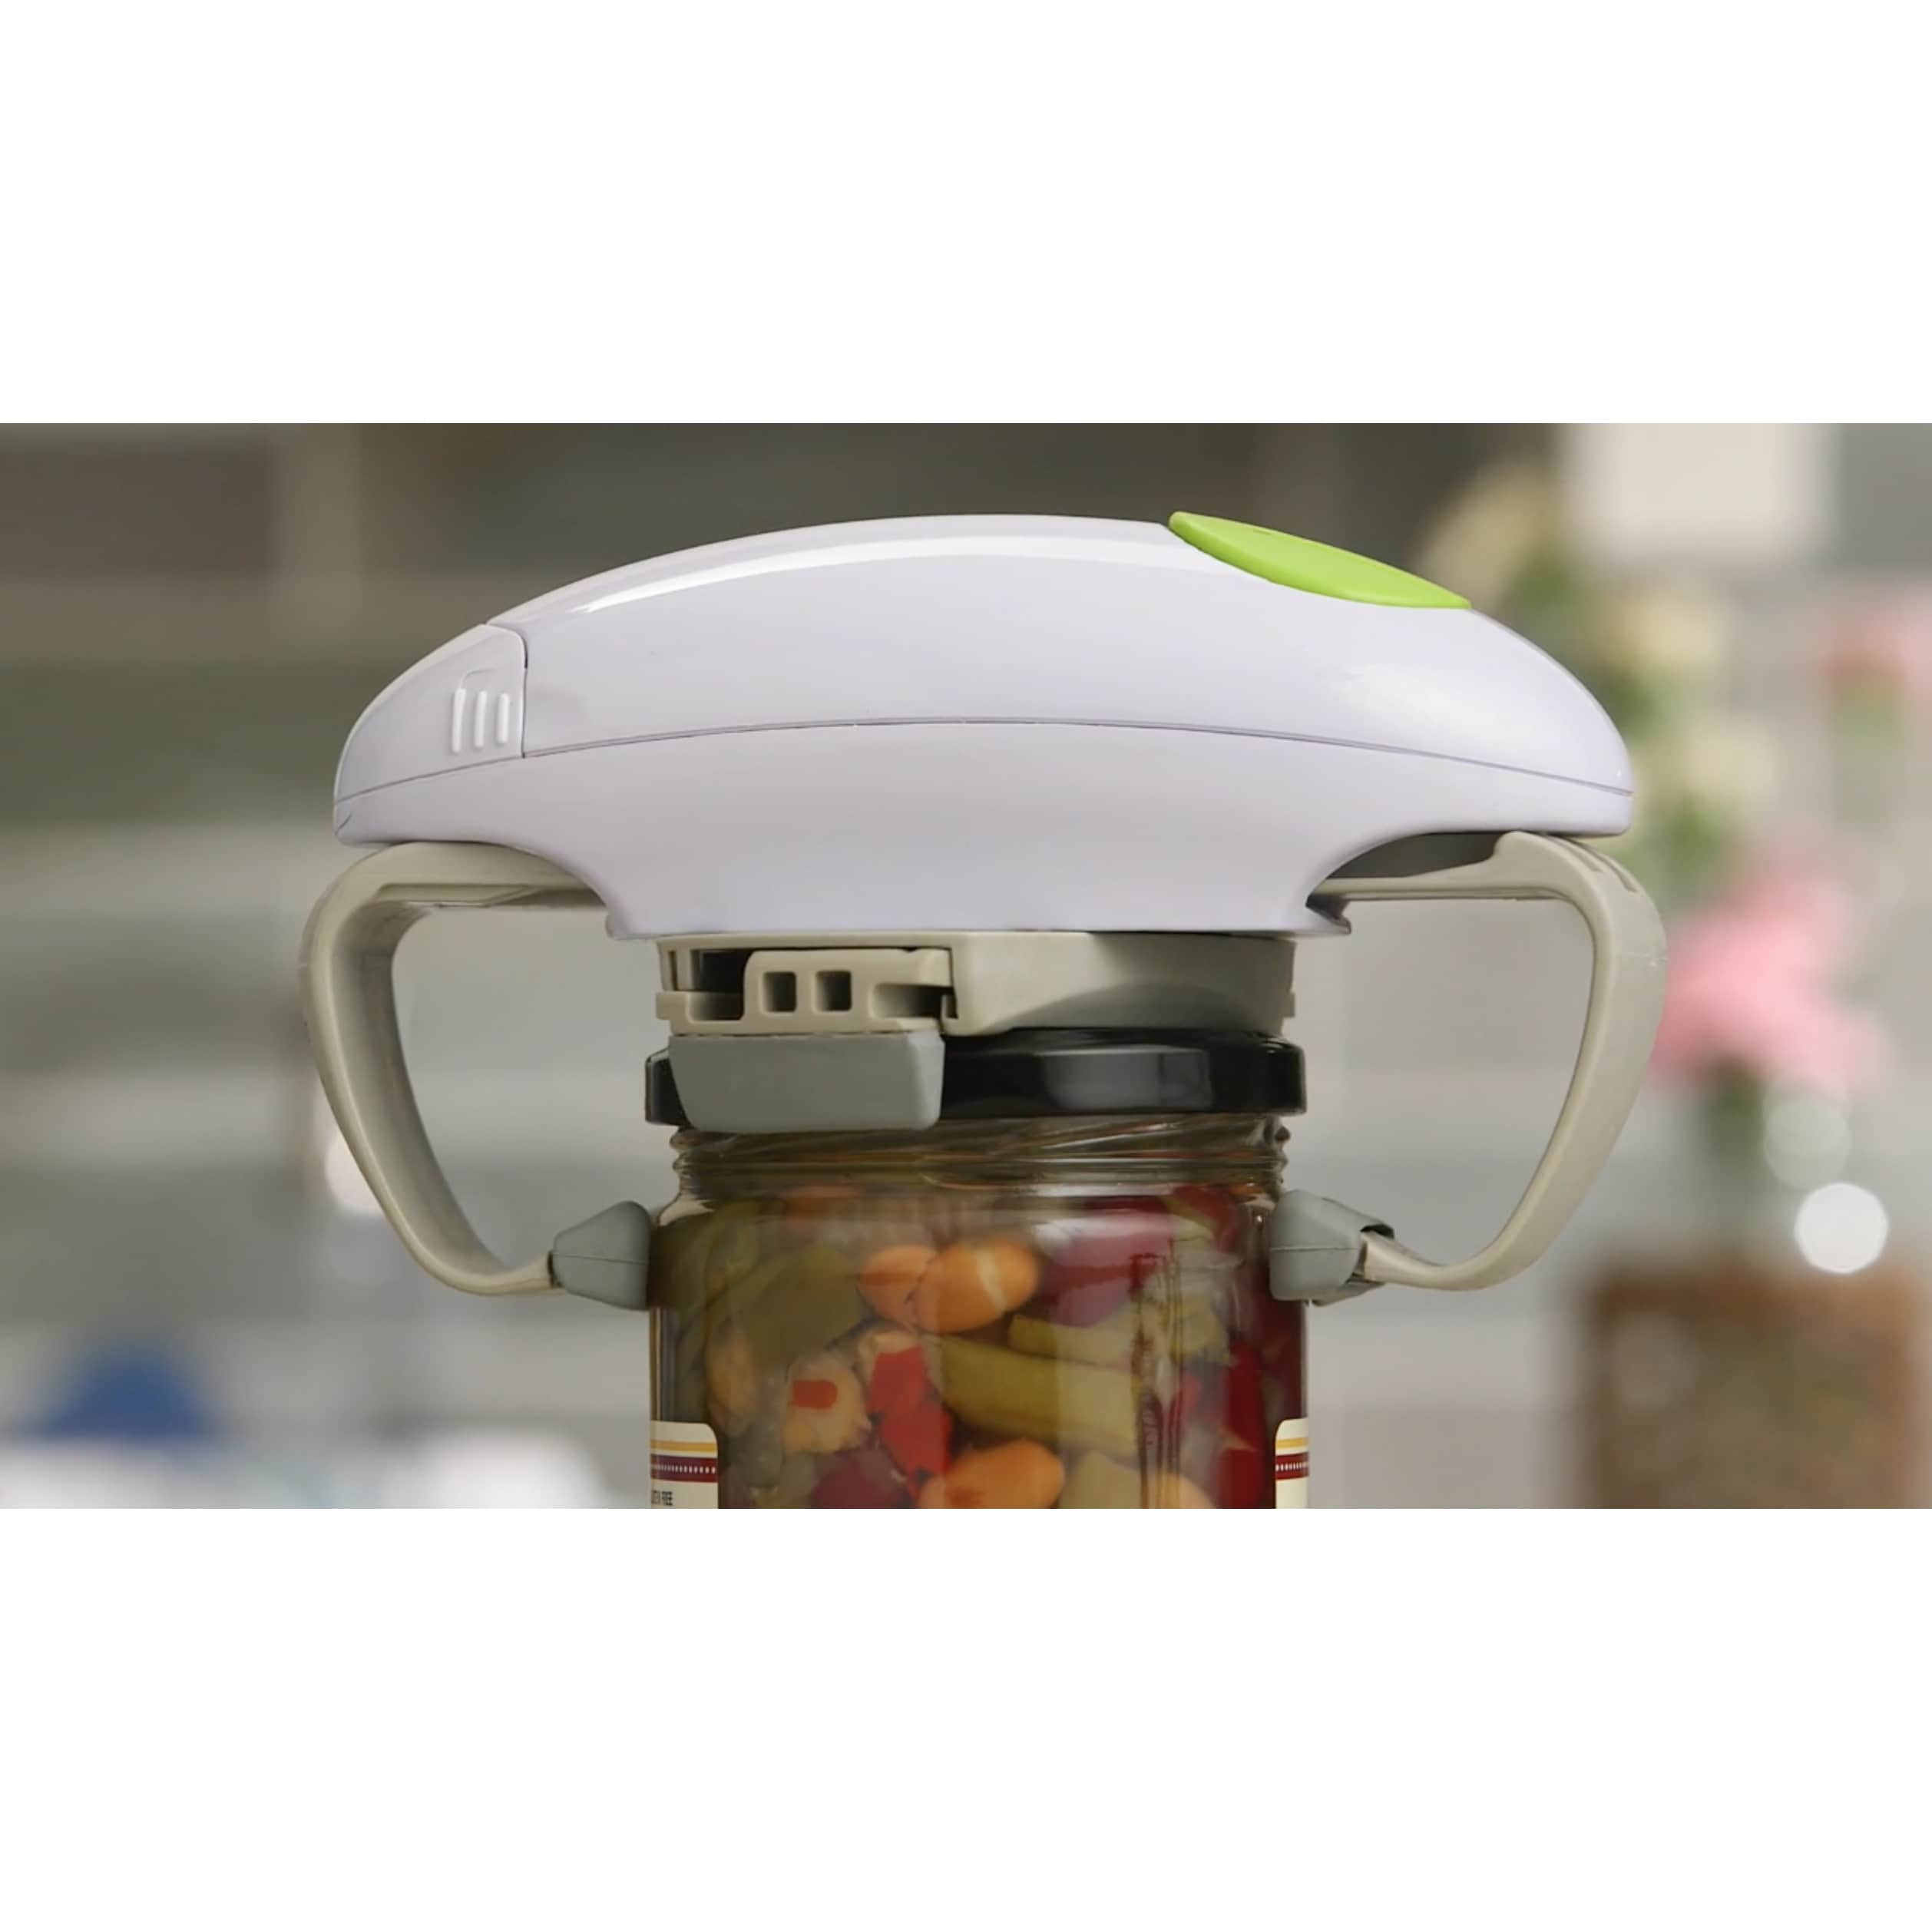 The As Seen on TV RoboTwist Hands Free Electric Jar Openerundefined - Bed  Bath & Beyond - 12508187